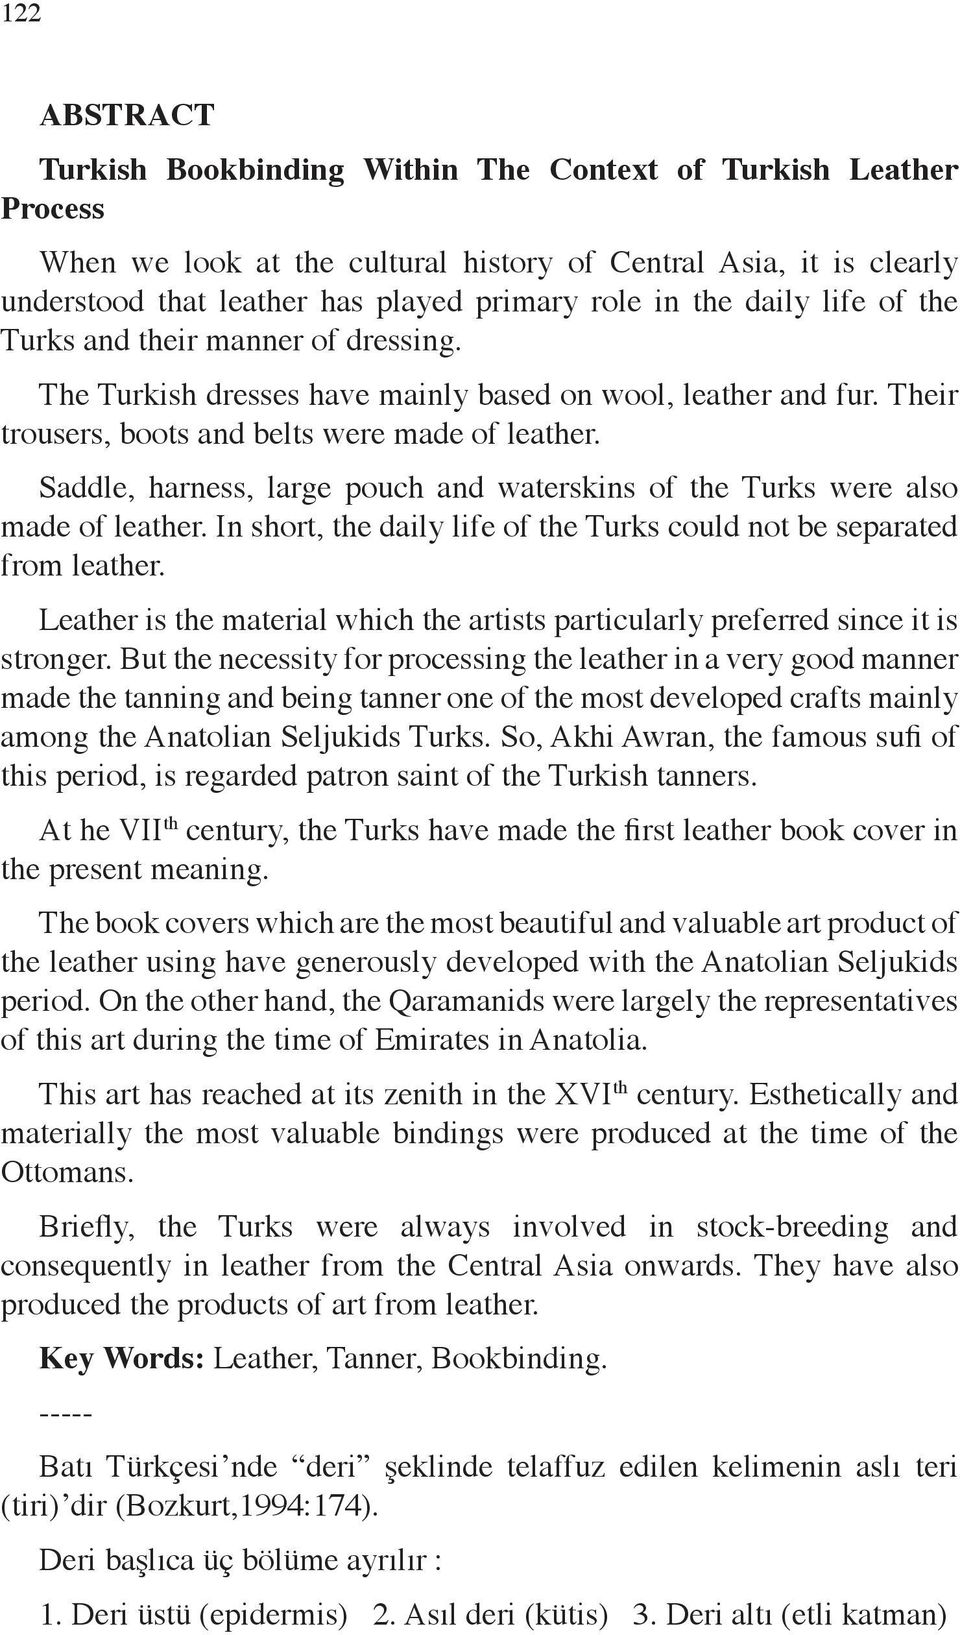 Saddle, harness, large pouch and waterskins of the Turks were also made of leather. In short, the daily life of the Turks could not be separated from leather.